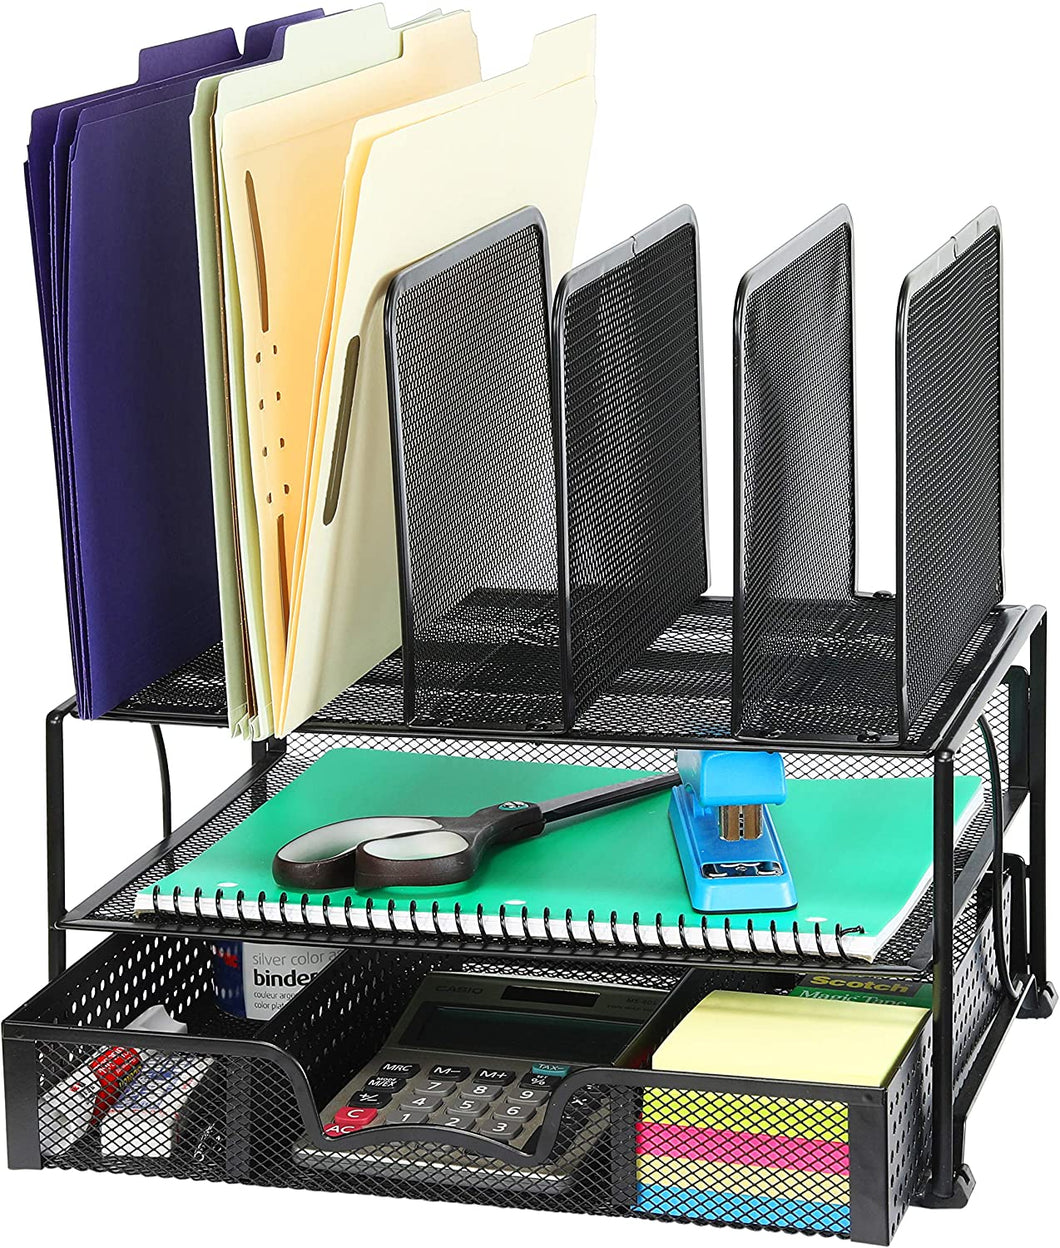 Mesh Desk Organizer with Sliding Drawer, Double Tray and 5 Upright Sections